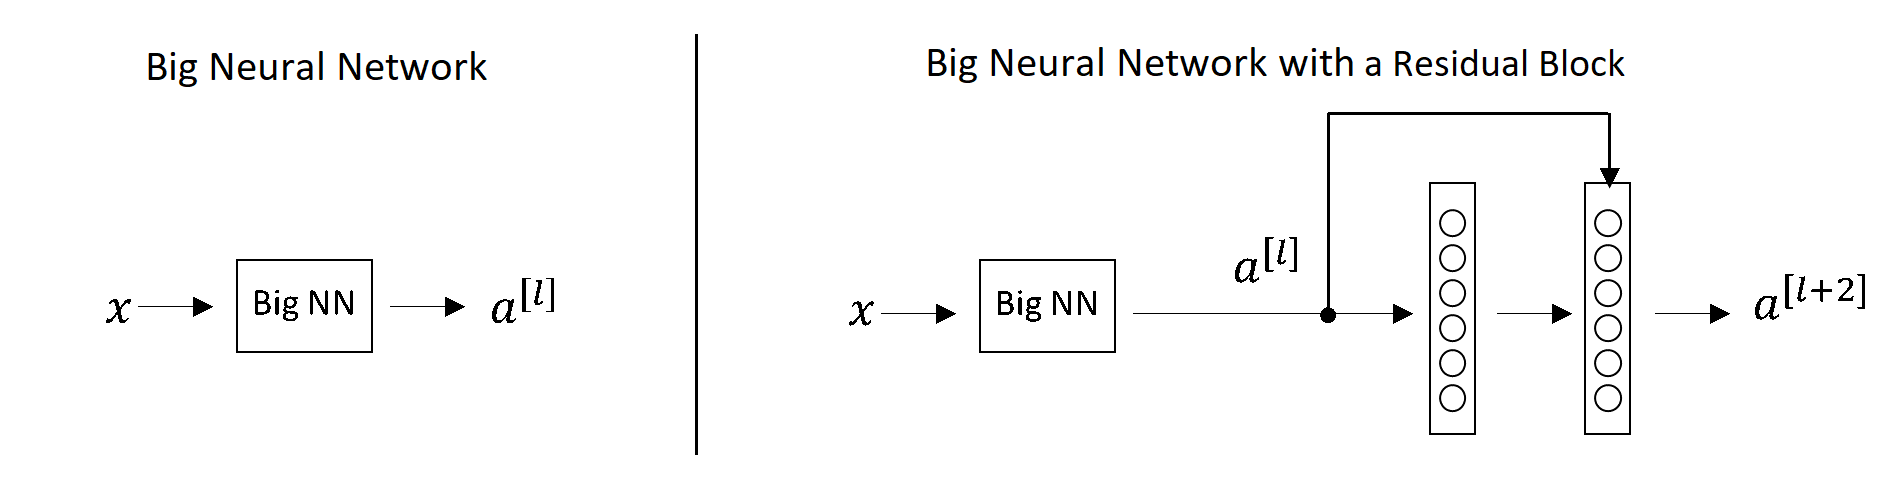 Big neural network and a big neural network with a residual block